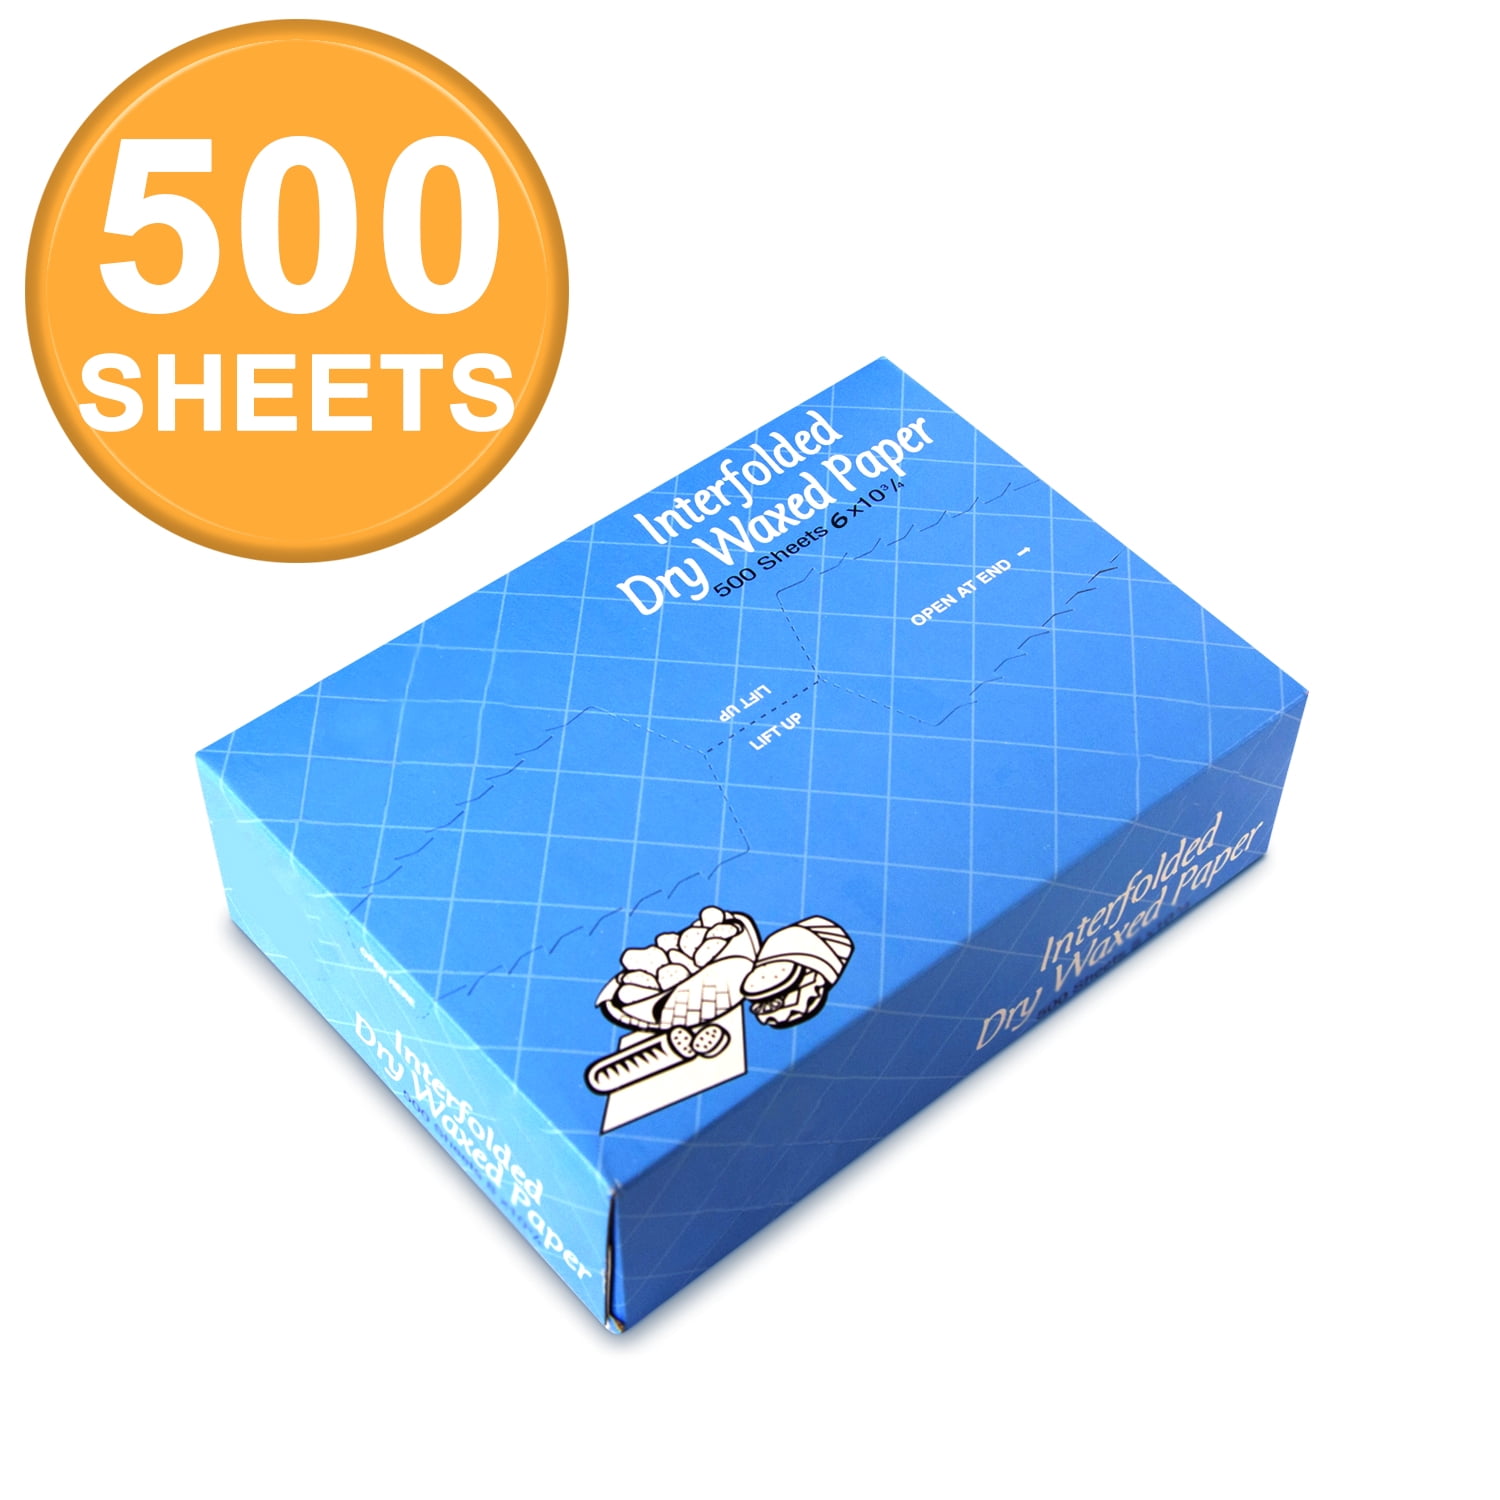 1000 Sheets Interfolded Dry Wax Paper White Bakery & Pastry Pick up Tissue 